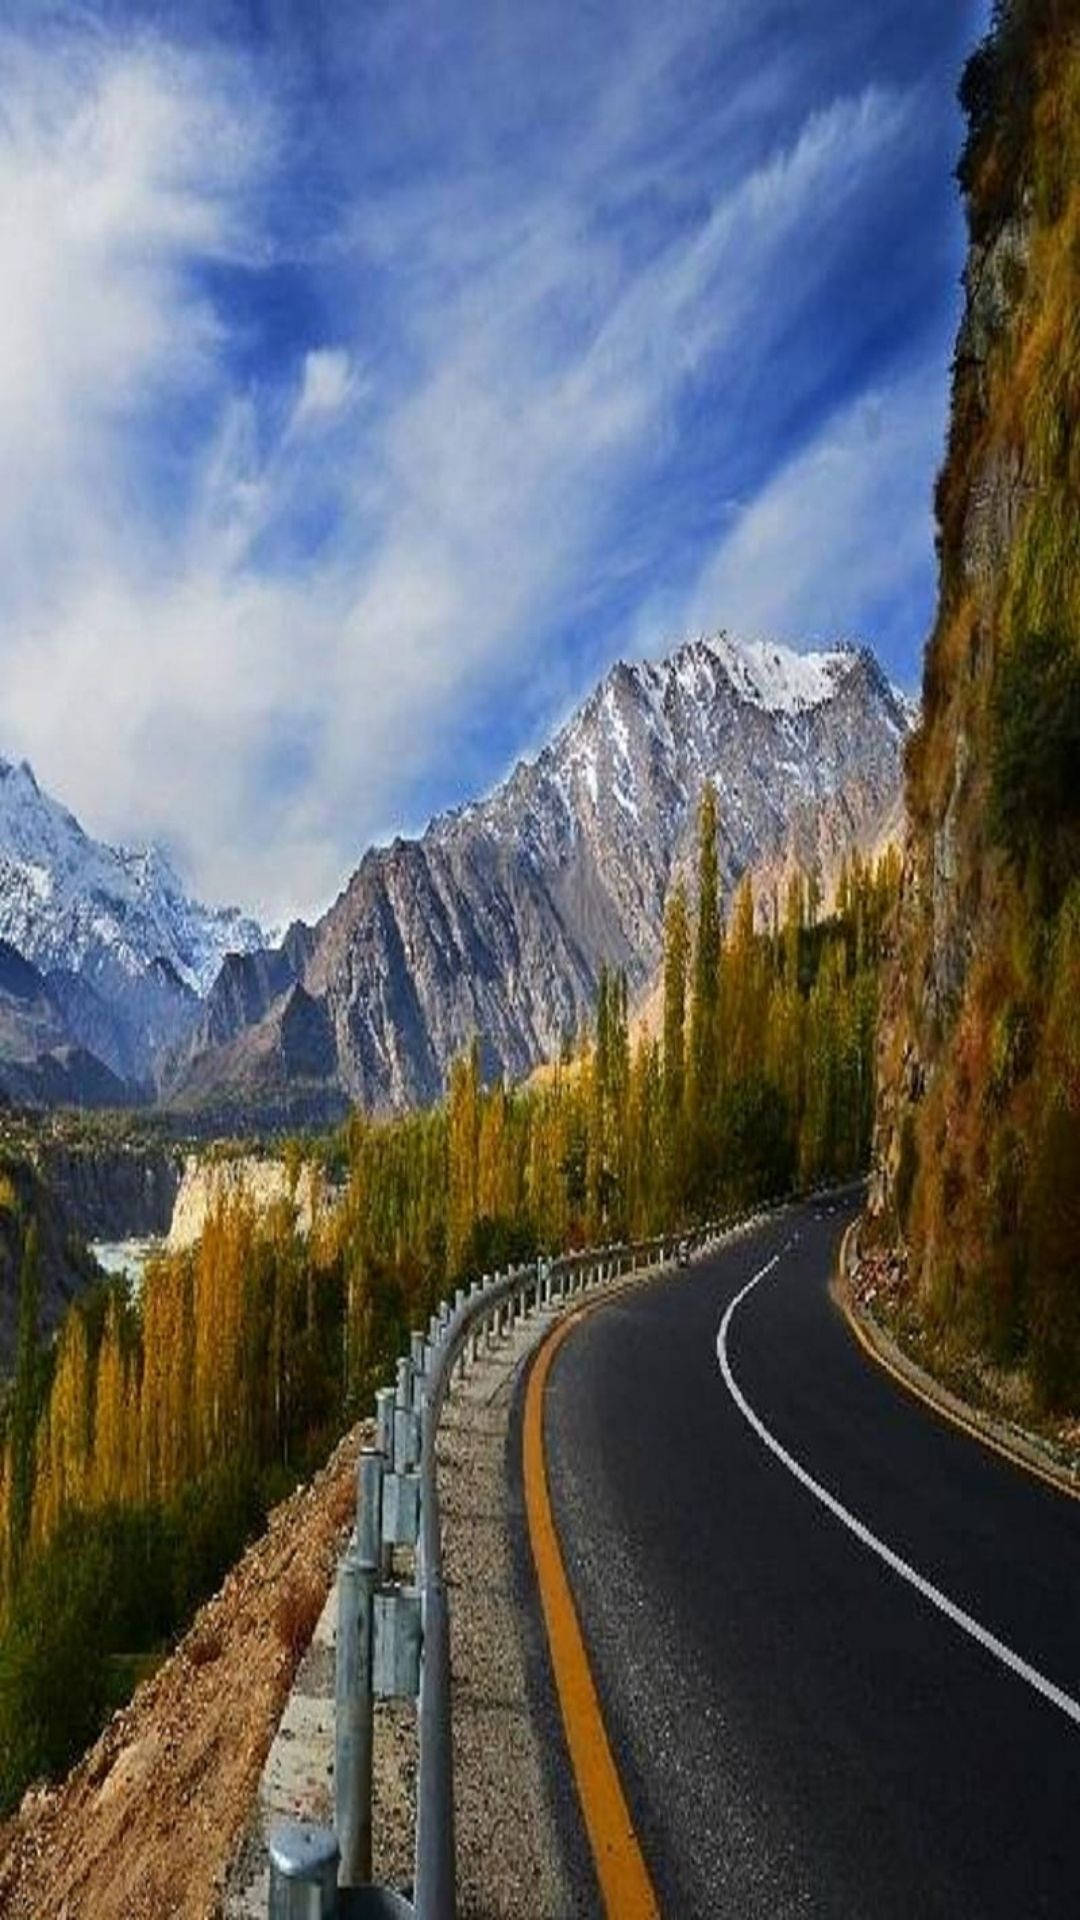 Pakistan Road In Valley Background